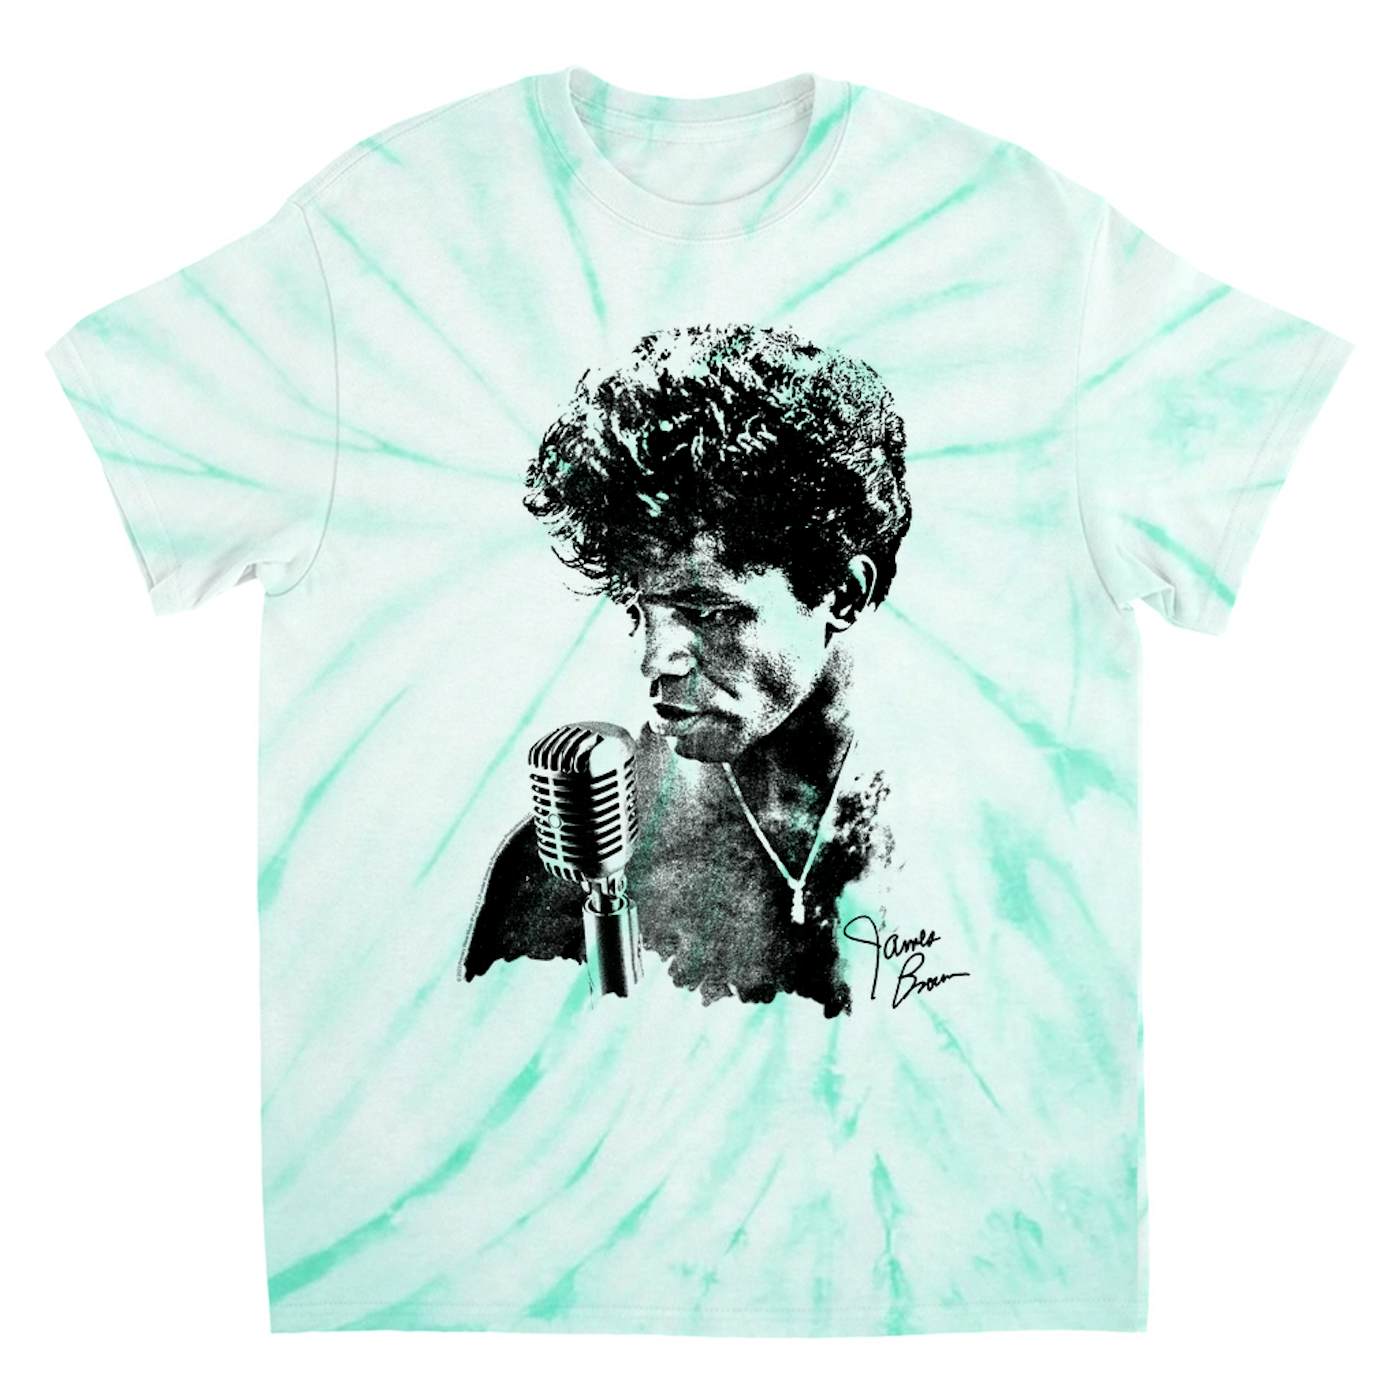 James Brown T-Shirt | Grainy Black White Photo With Signature James Brown Tie Dye Shirt